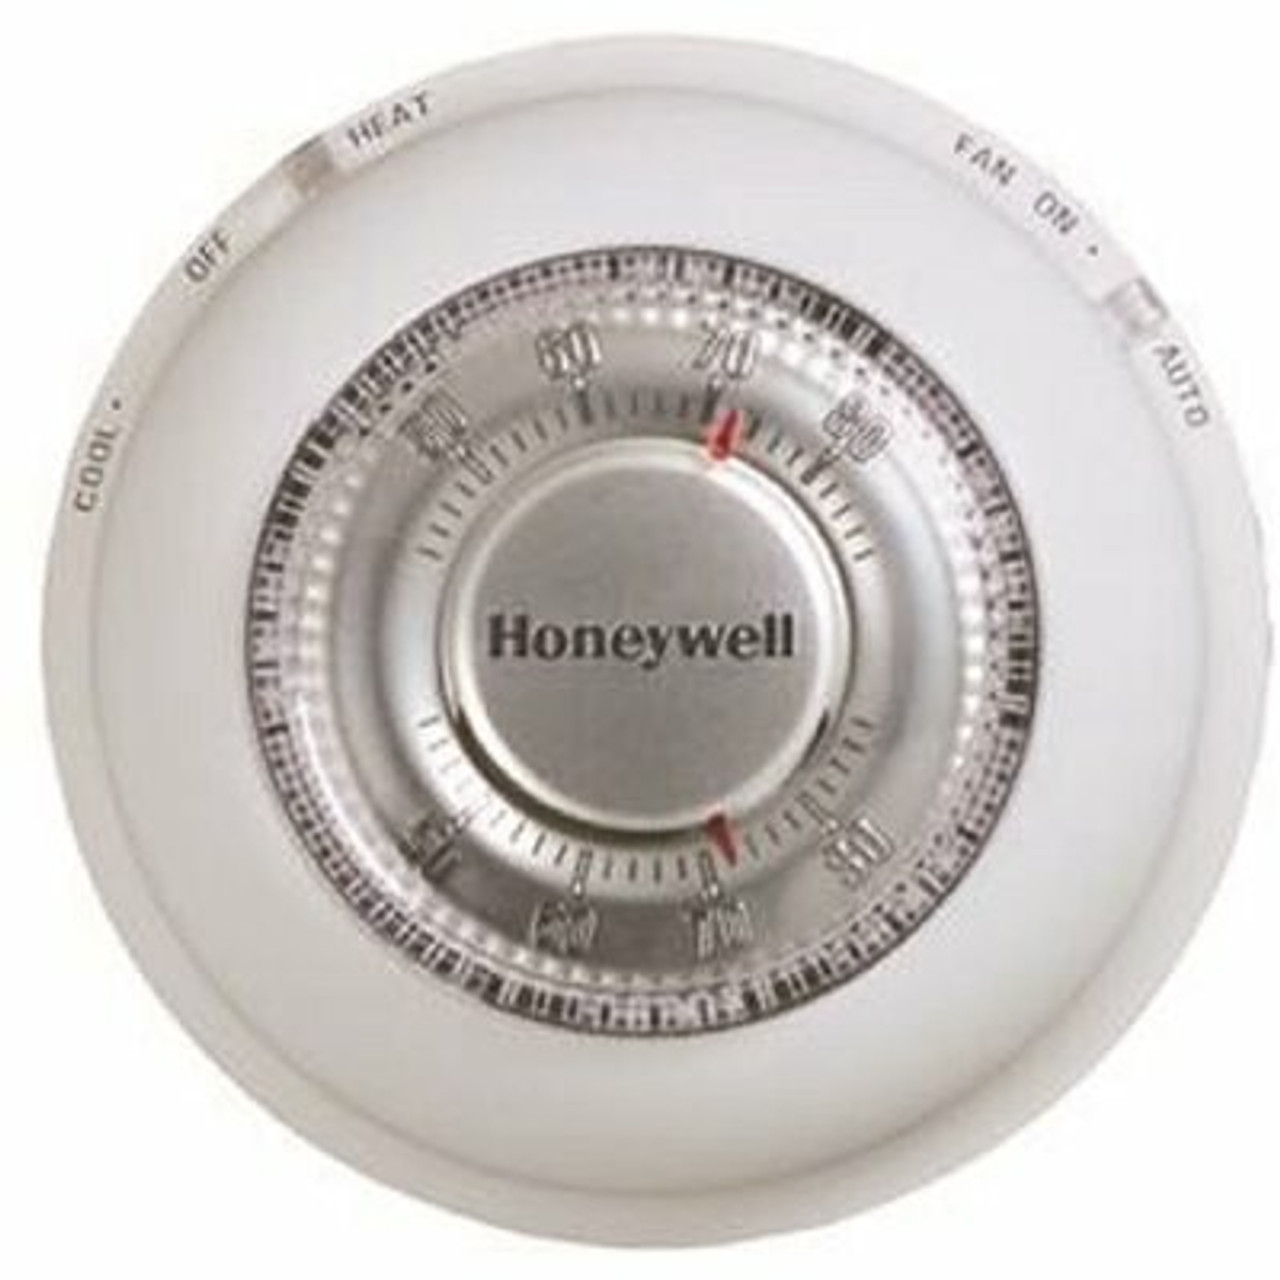 Honeywell Home Round Non-Programmable Thermostat With 1H/1C Single Stage Heating And Cooling